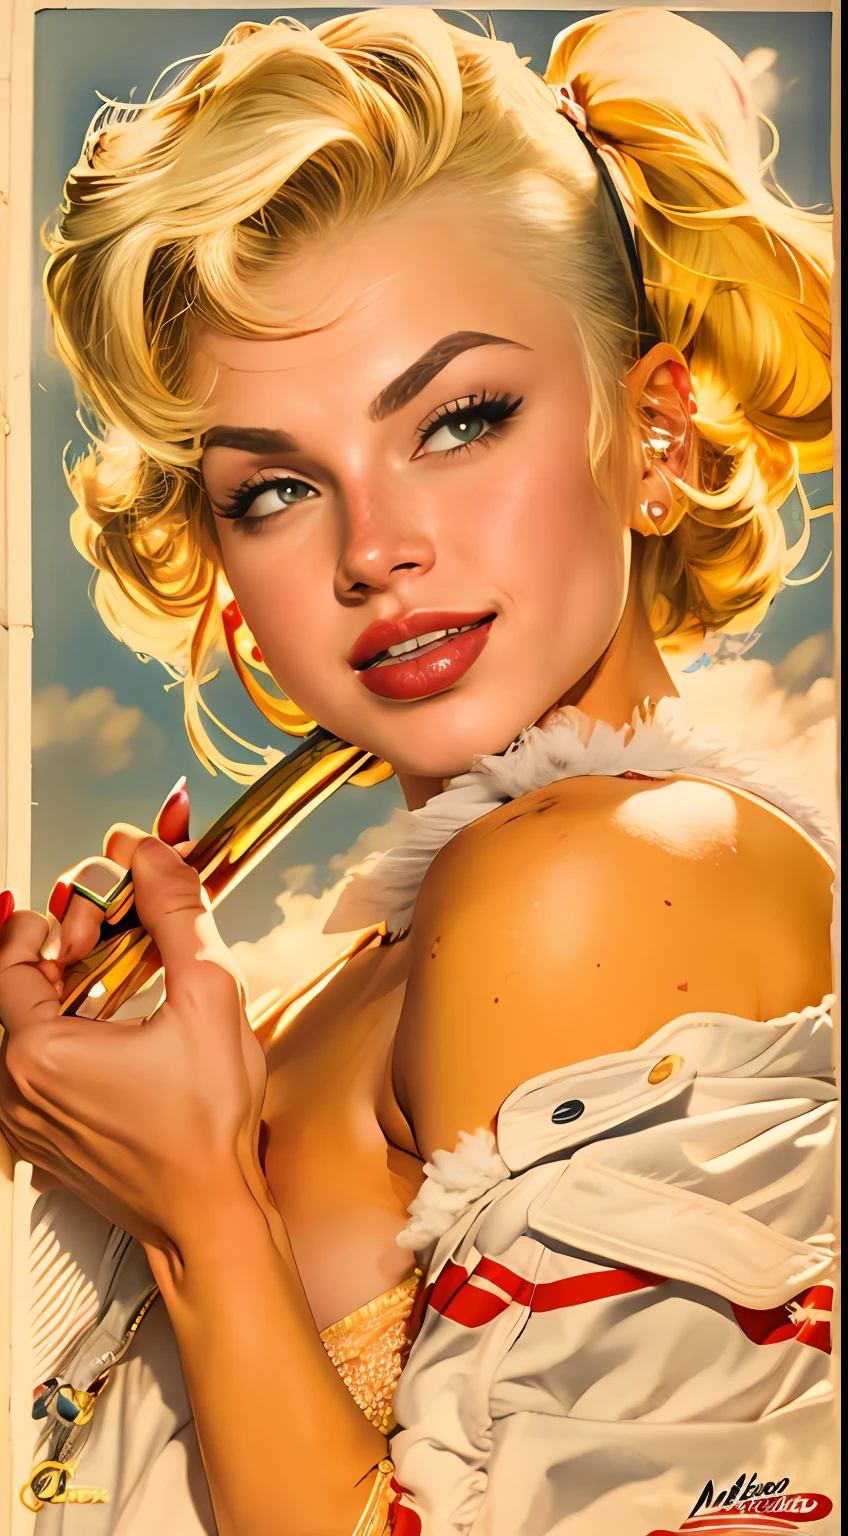 Masterpiece, Best Quality, 4k, ((in the style of Gil Elvgren or Alberto Vargas)), ((Android-18 DBZ,))red lipstick, moles, Moda vintage, high waist shorts, cropped cover, wavy yellow hair, 1950s pinup girl, surf competition